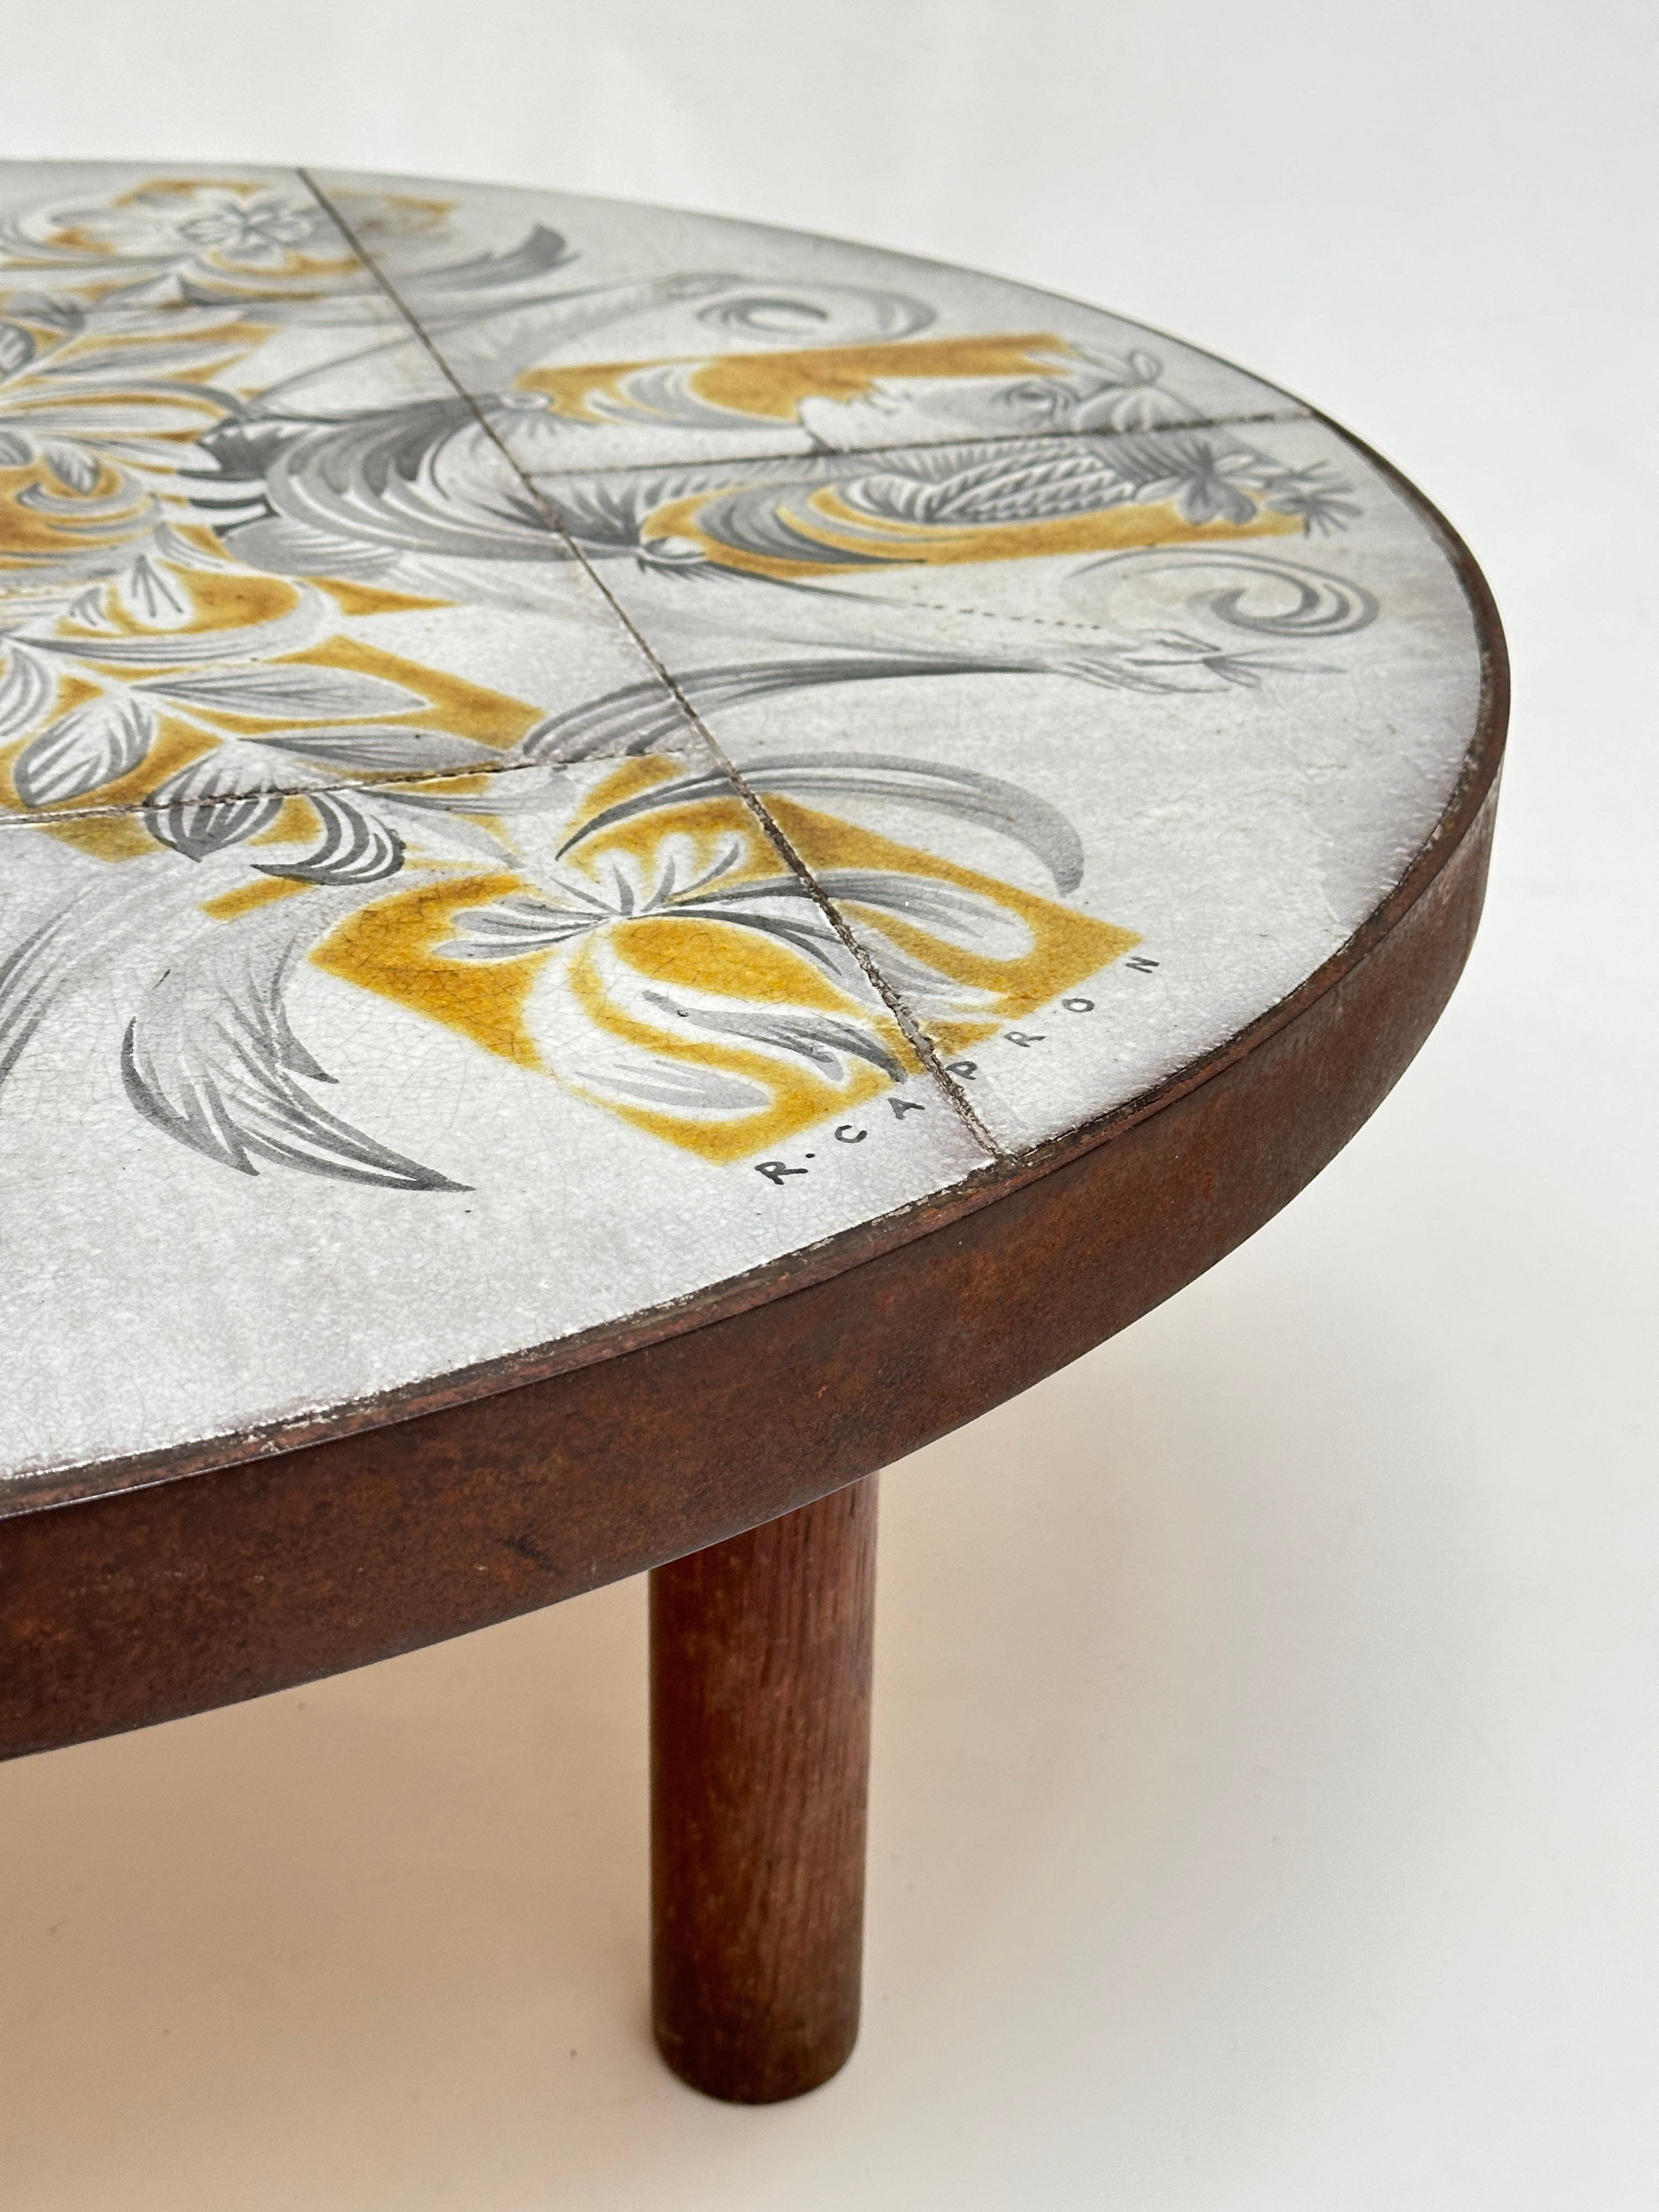 Modern Round Coffee Table by Jean Derval for Roger Capron, Vallauris c. 1970 For Sale